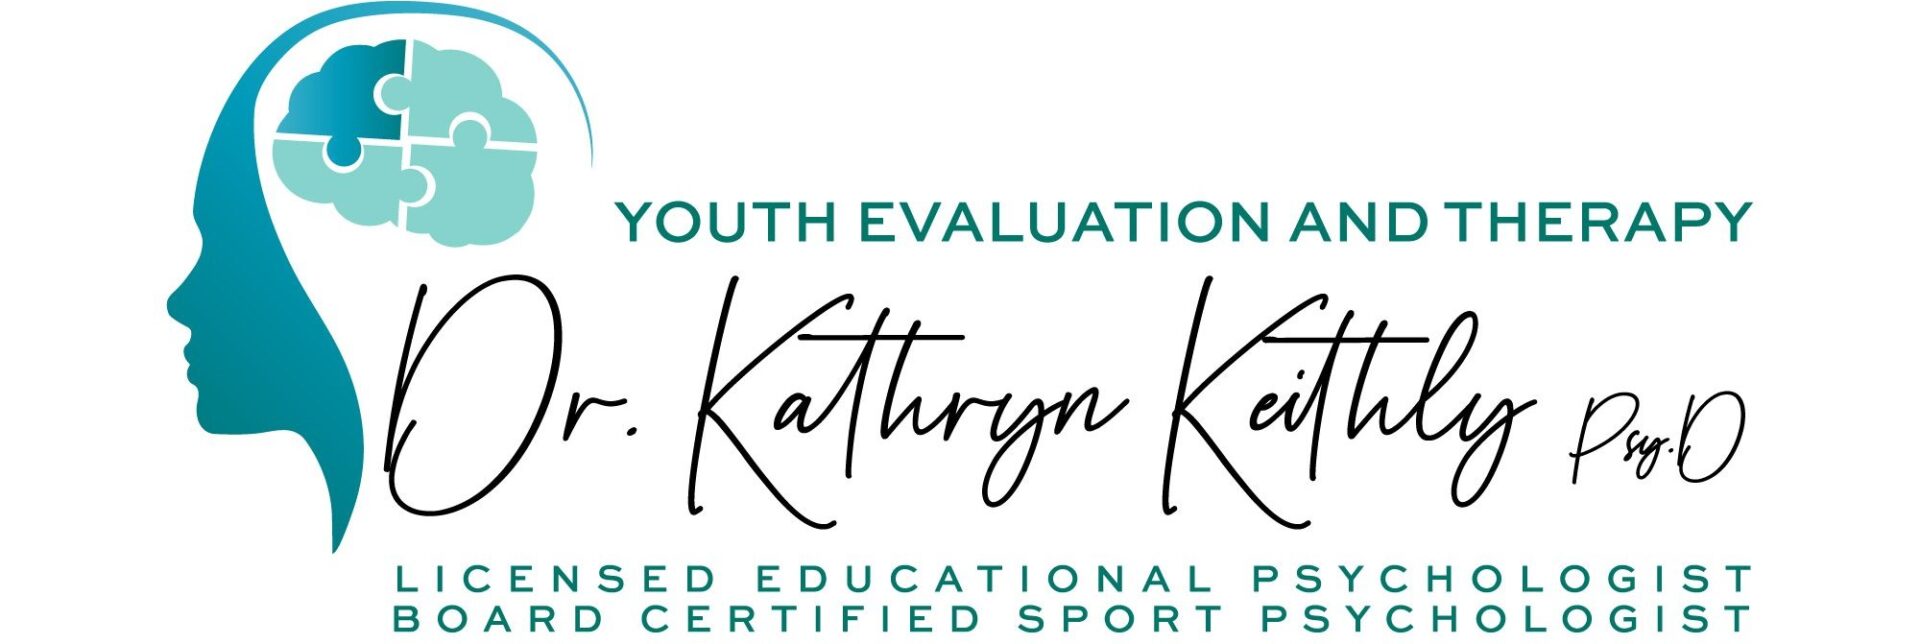 Youth Evaluation and Therapy logo banner